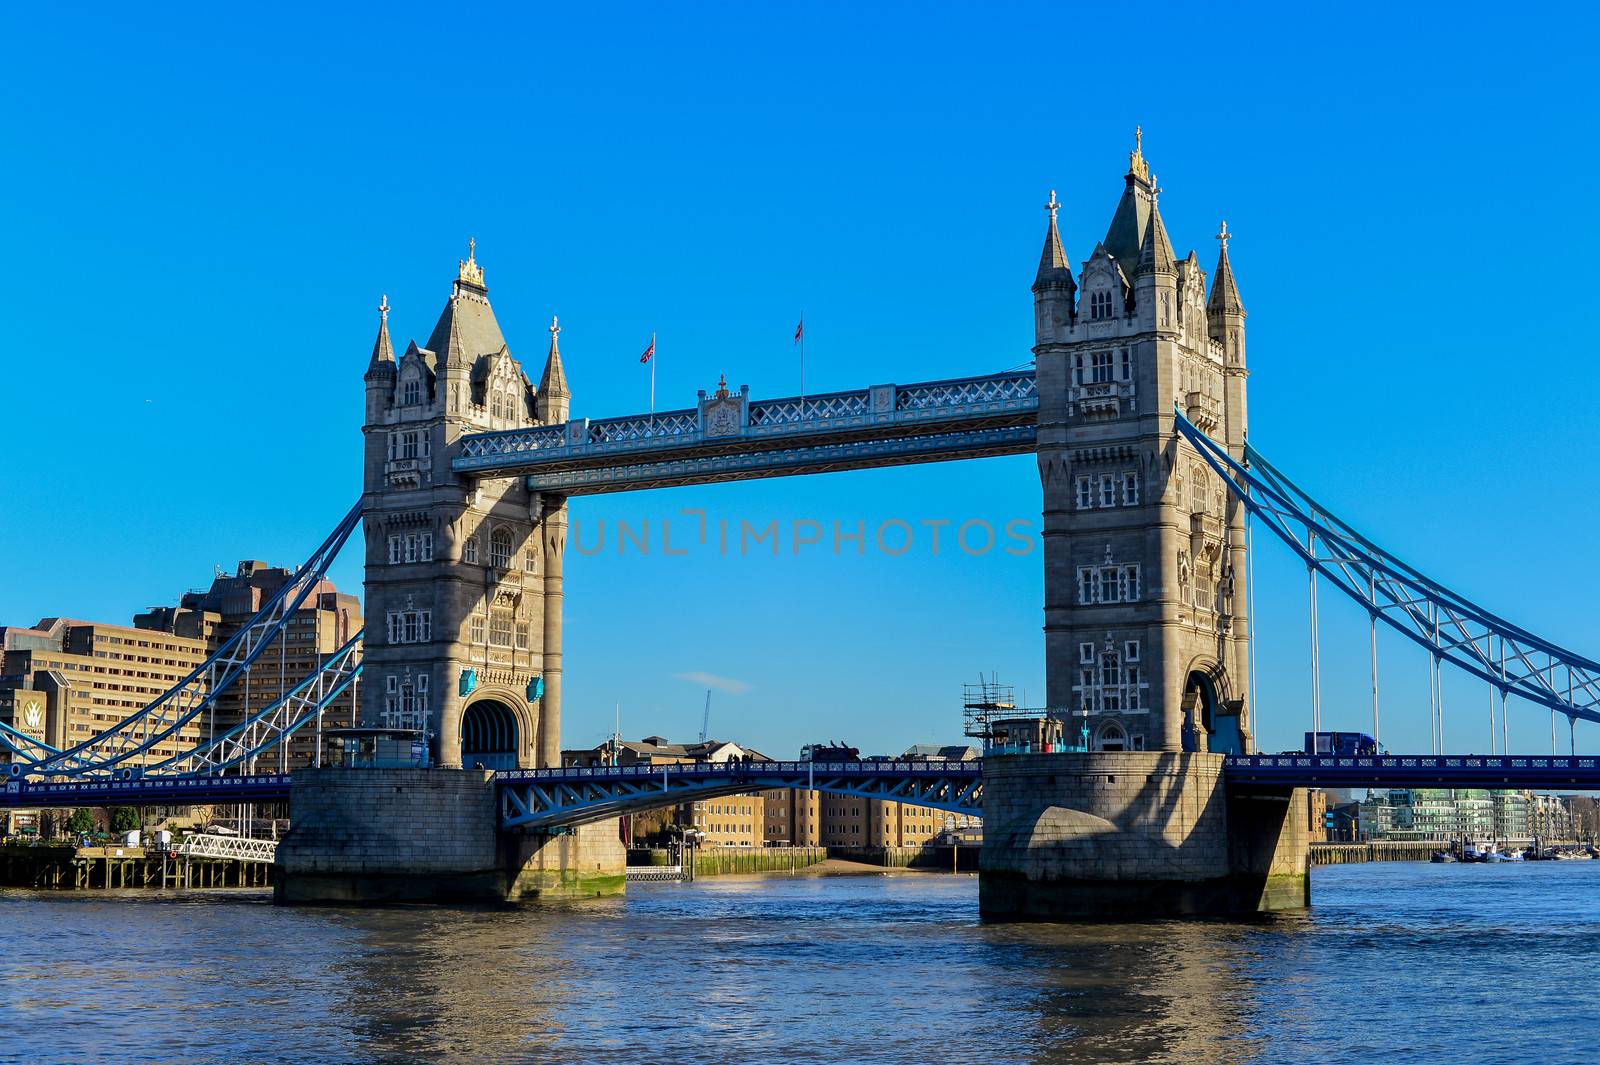 The Tower Bridge in London on a bright sunny day